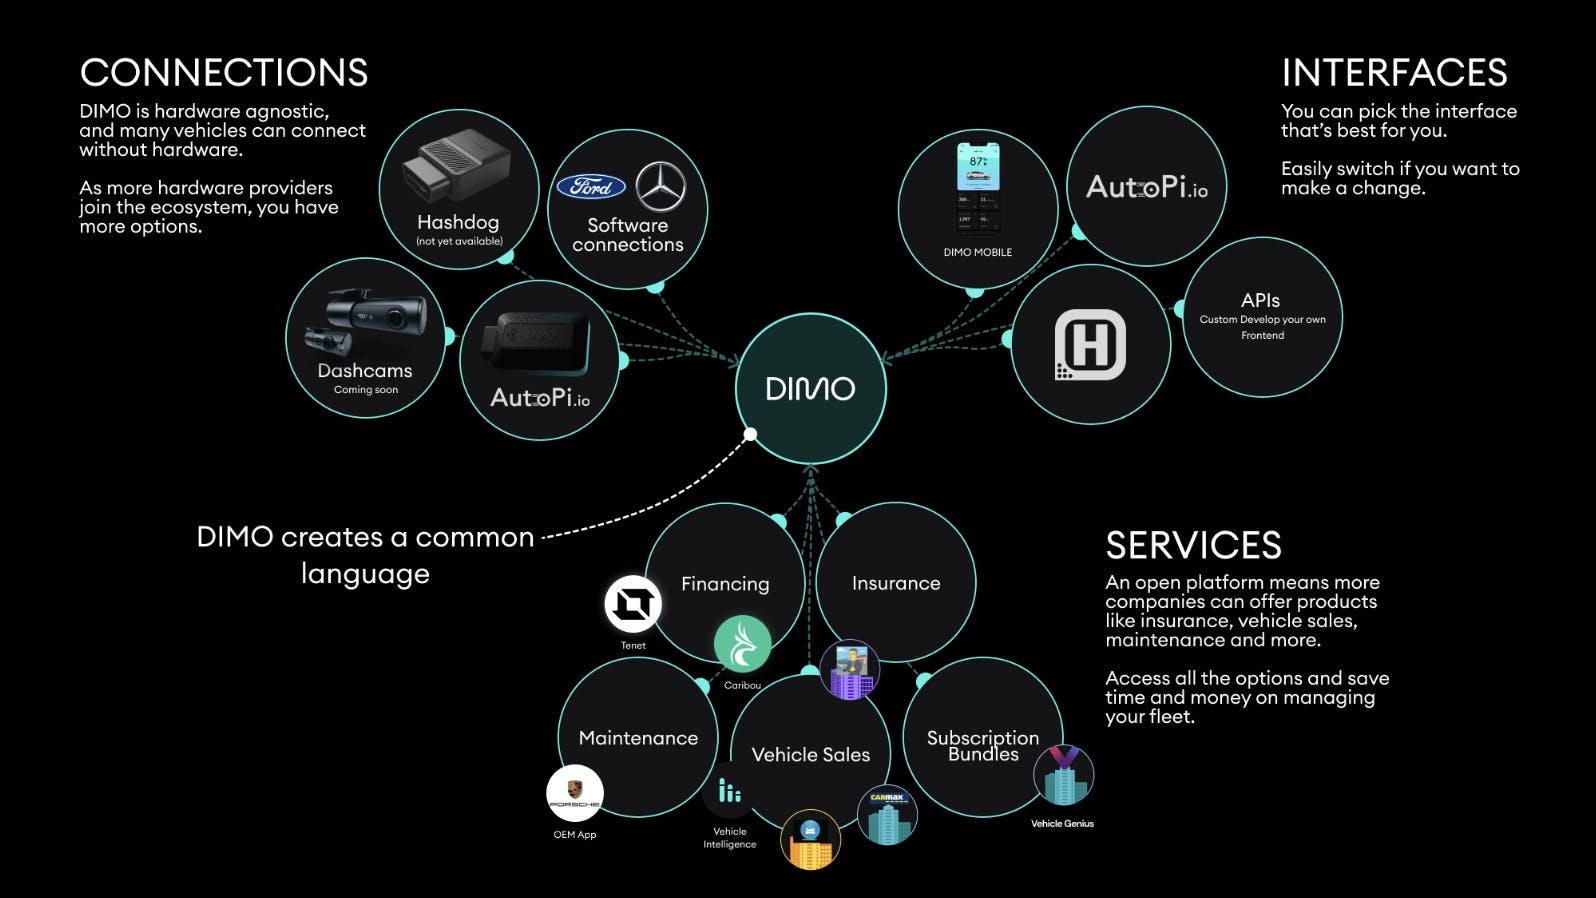 DePIN unlocks and optimizes infrastructural services and use cases that were previously monopolized by a handful of corporations. Source: Graphic (https://twitter.com/DIMO_Network/status/1755306677446857044?s=20) by DIMO_Network, published on Twitter, used under a fair use rationale.